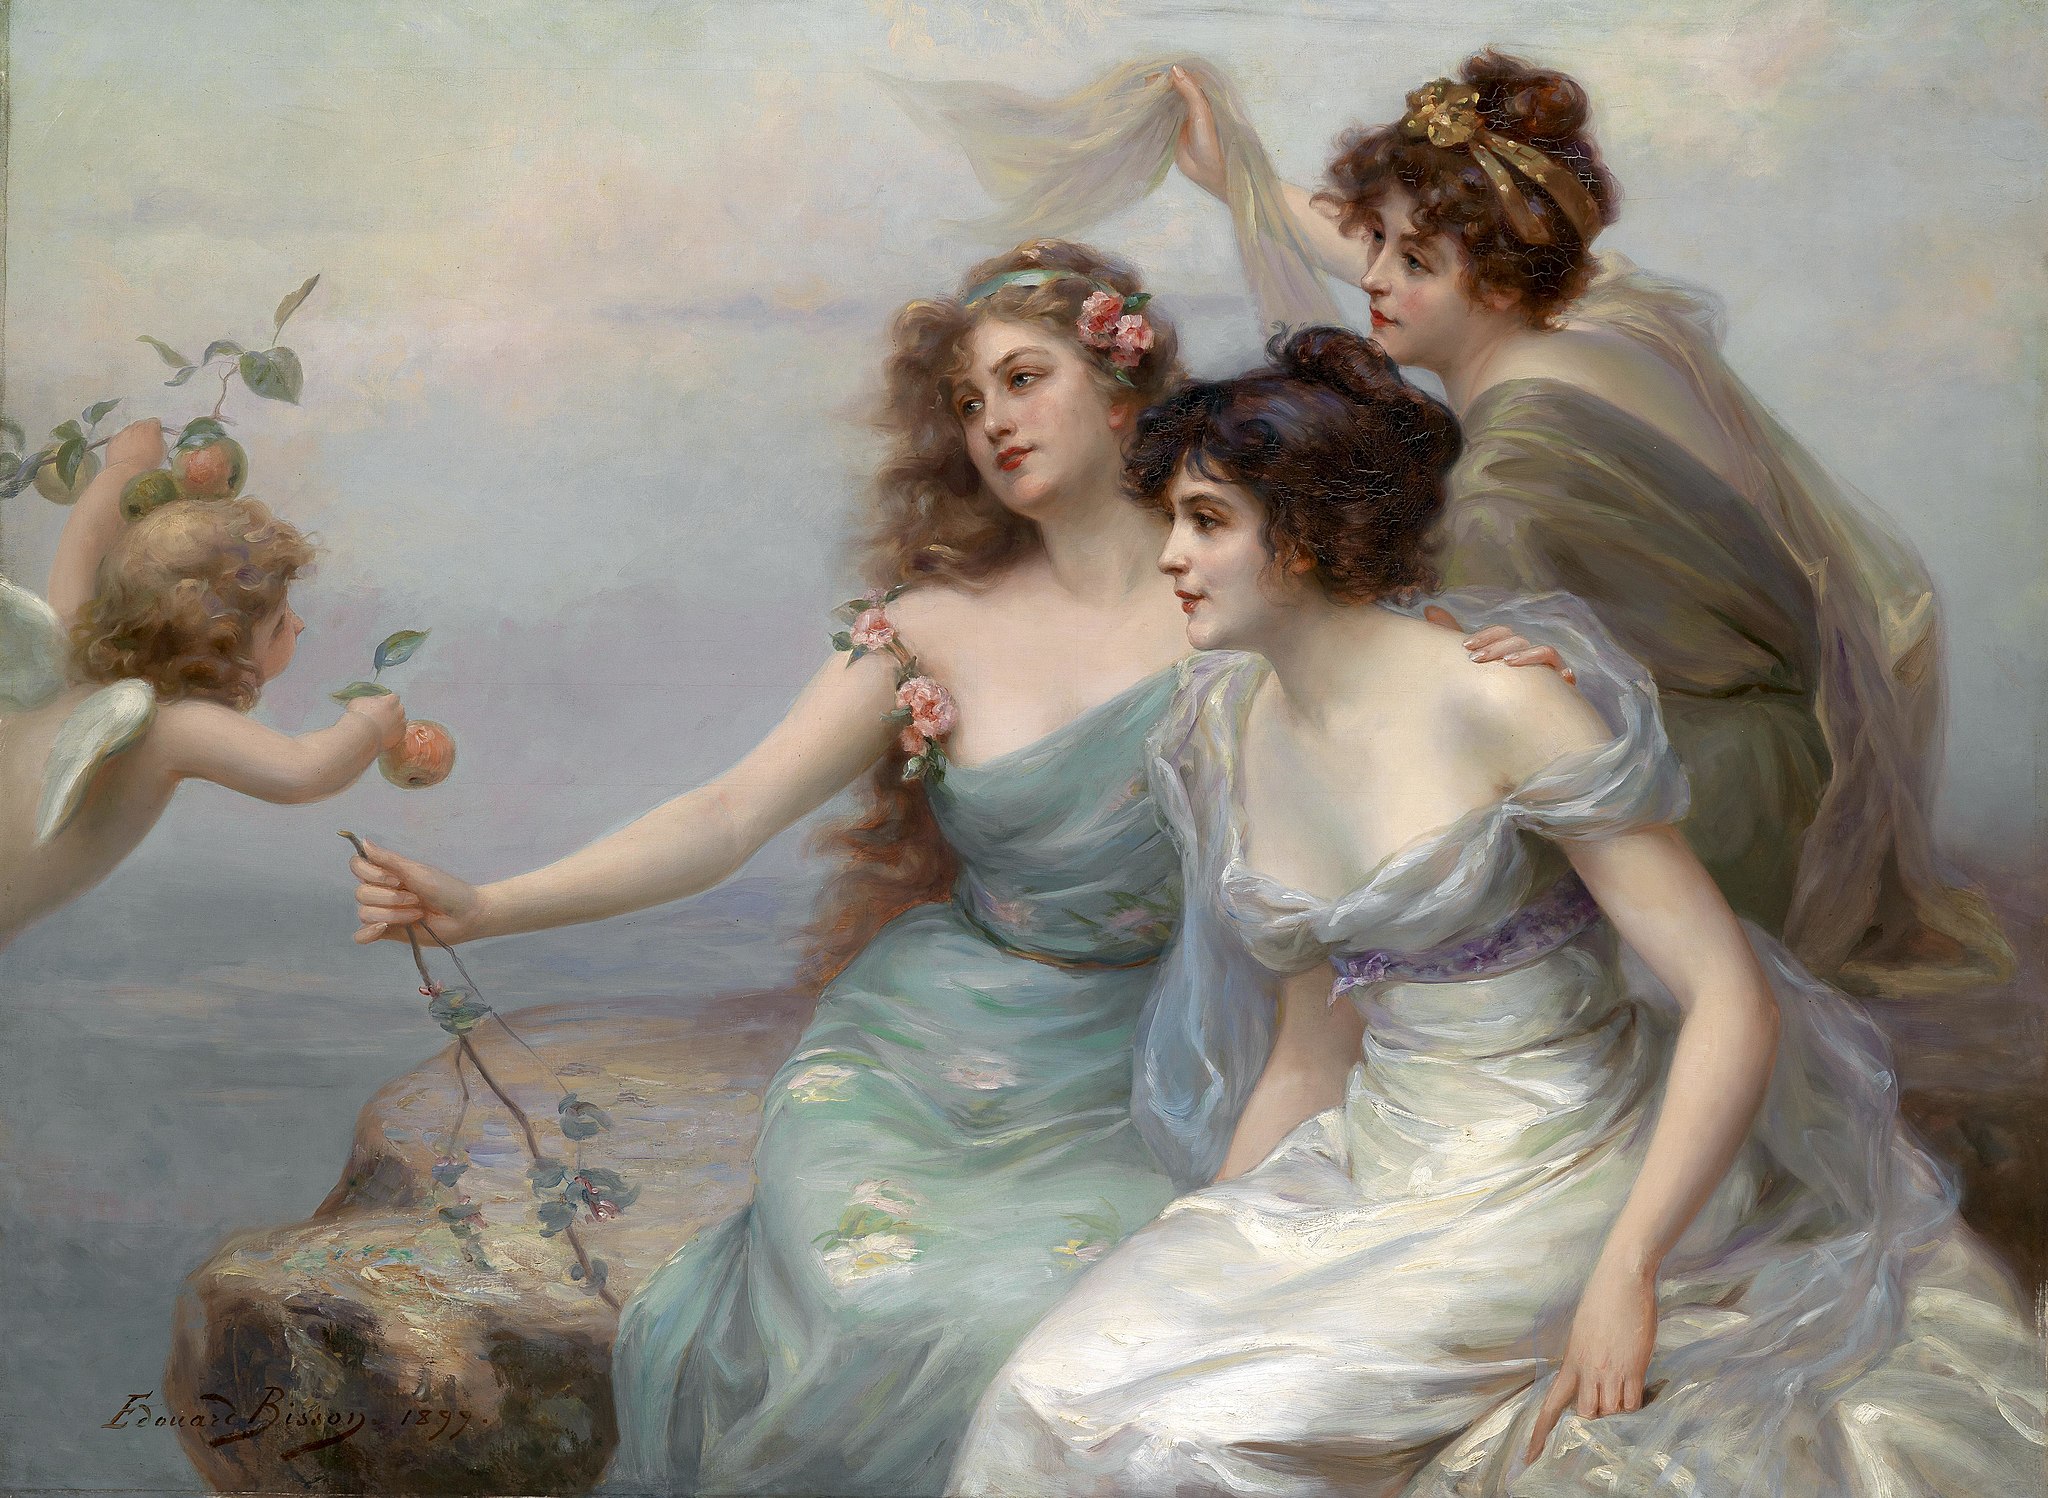 A painting of three women sitting on a rocky ledge. One of the women is reaching out to a cherub to grab a branch. Each woman is dressed in delicate flowy fabric. Their hair is adorned with flowers and ribbon crowns.